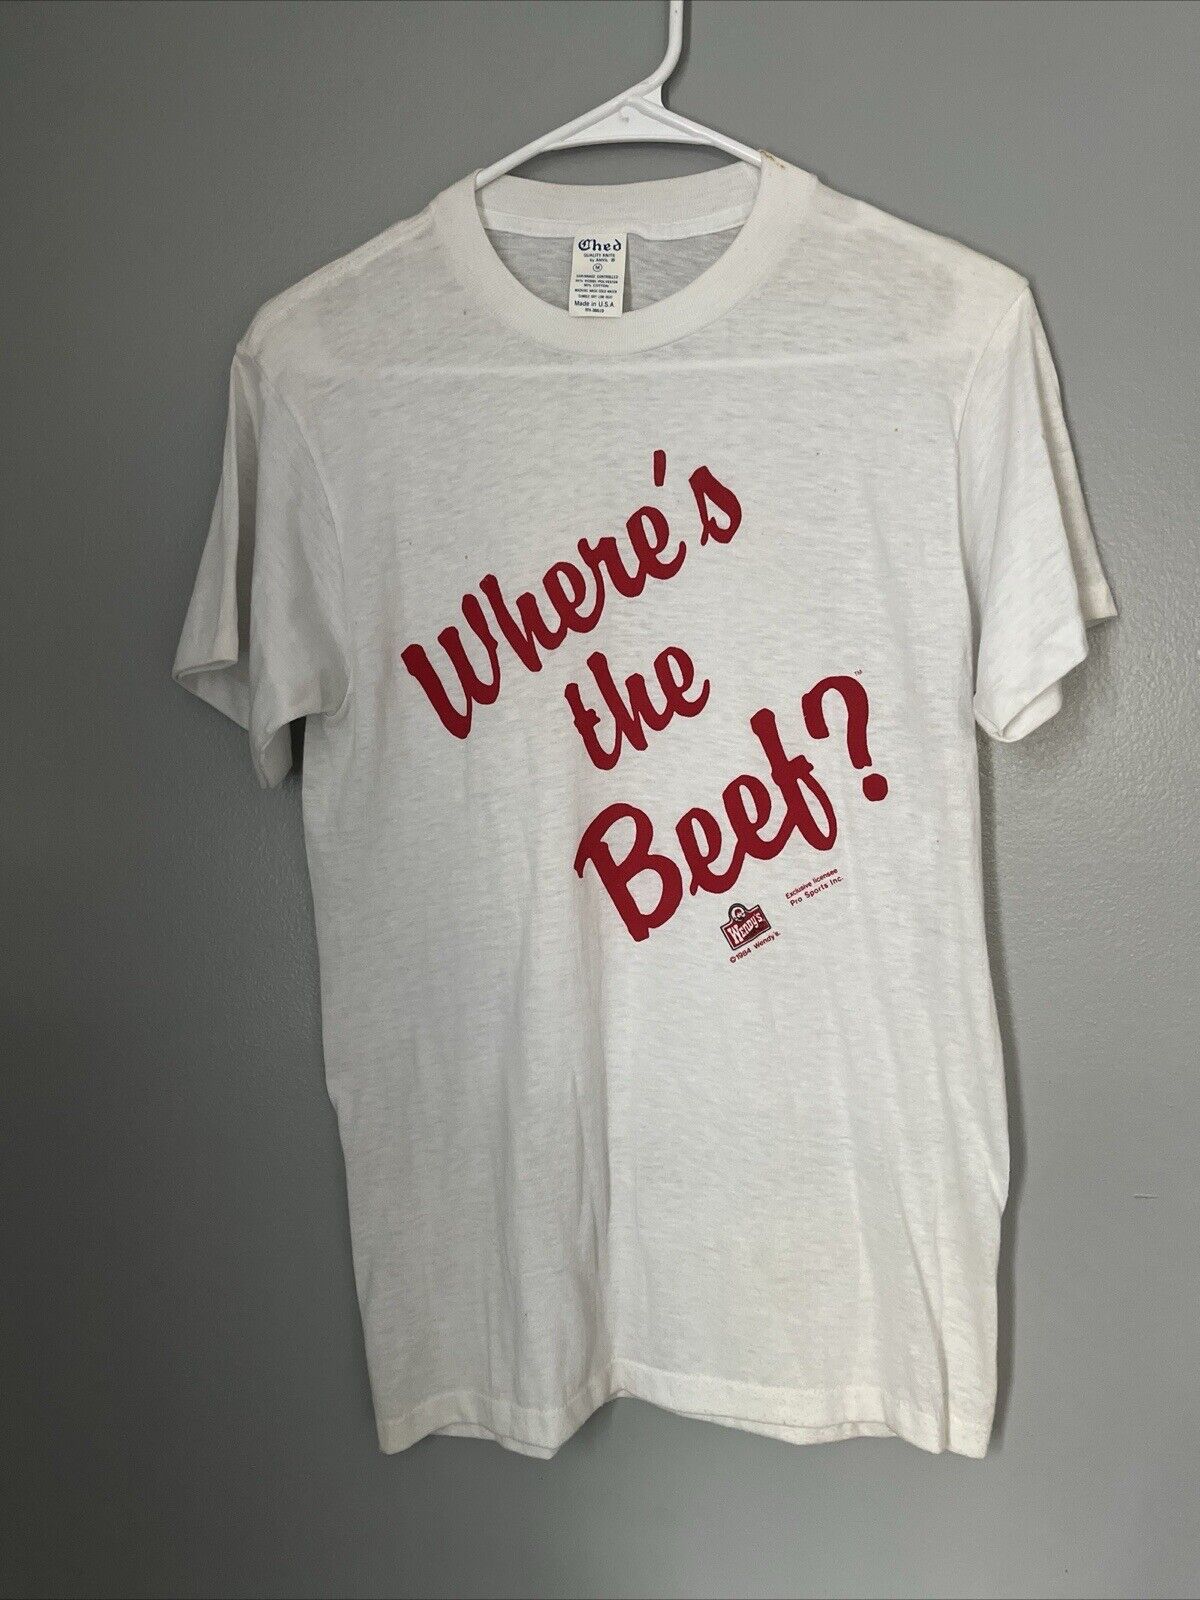 Vintage 1980s Wendy’s “Where’s the Beef?”  Advertisement Shirt  1984